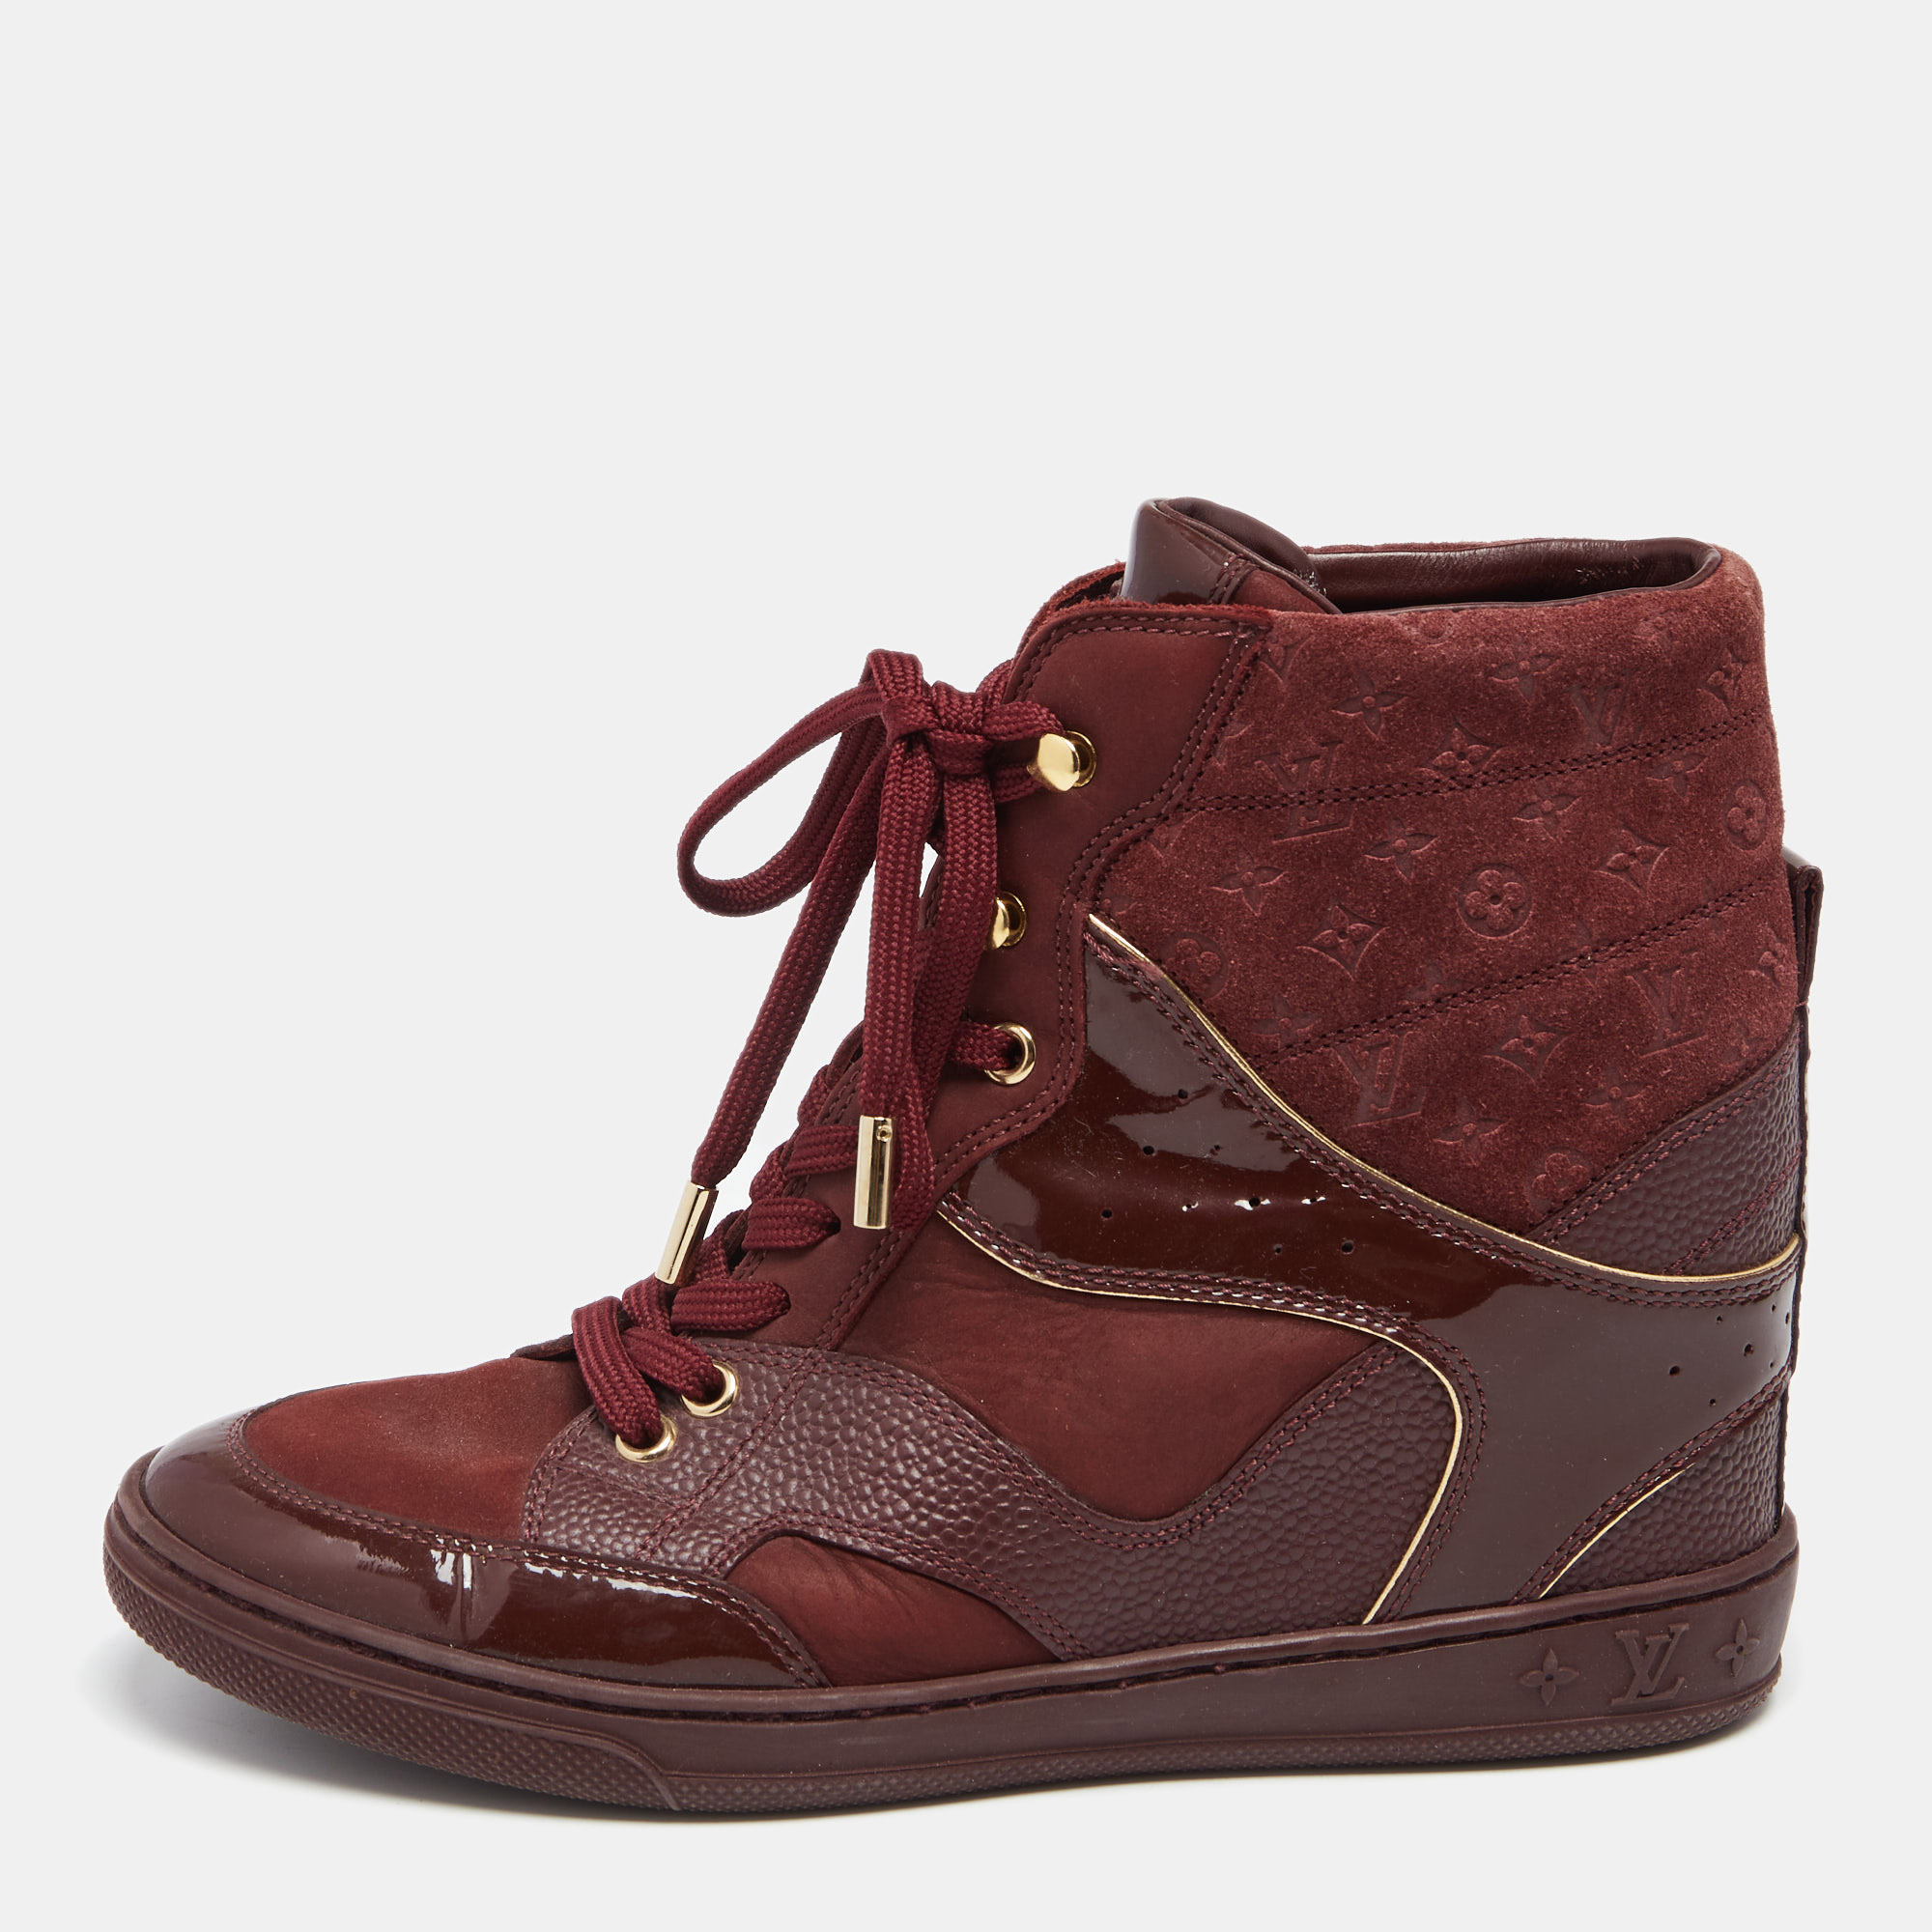 Presenting a sporty design thats blended with the LV touch of luxury. These wedge sneakers for women are crafted beautifully using quality materials and are set on wedge heels. Lace up closure and monogram embossing lend the perfect finish.